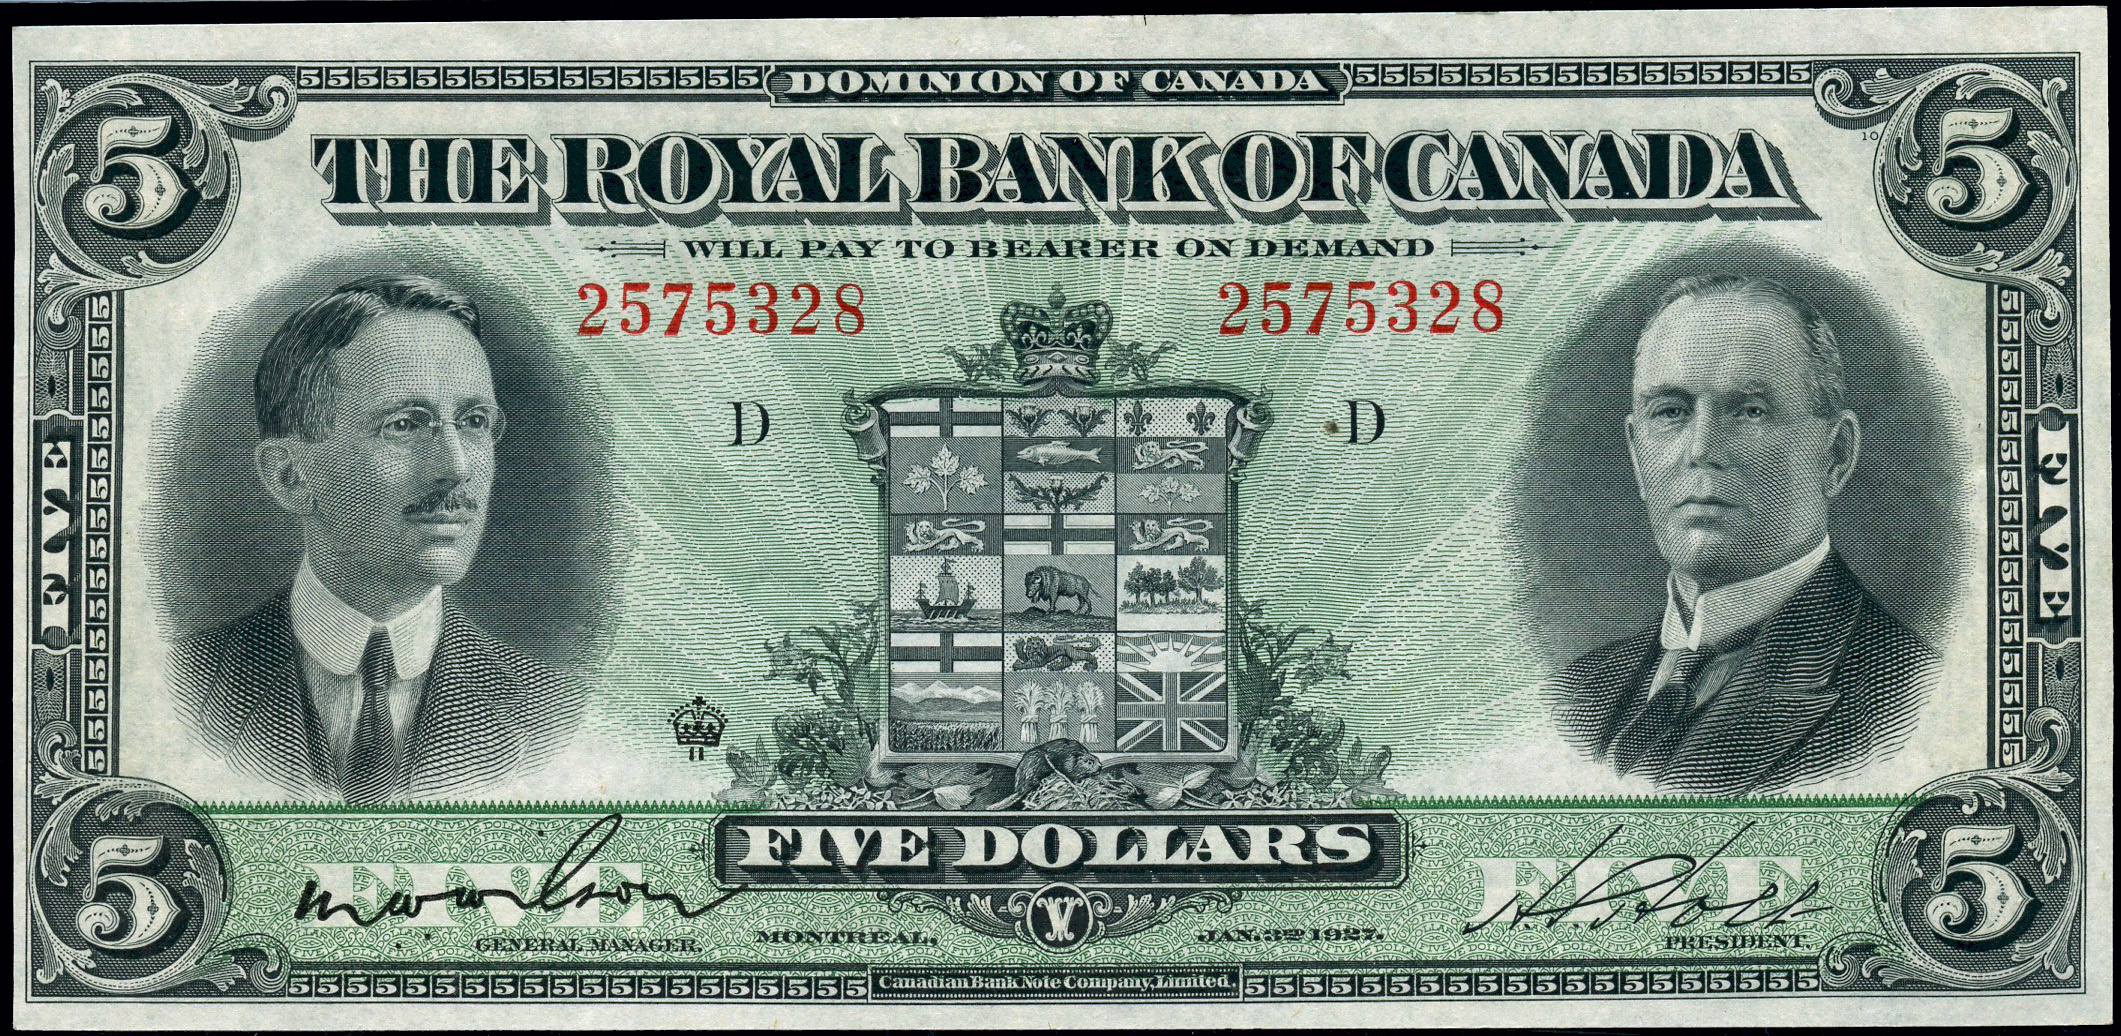 The Royal Bank of Canada; 1927 $5 CH-6301404 #2575328, PMG Choice